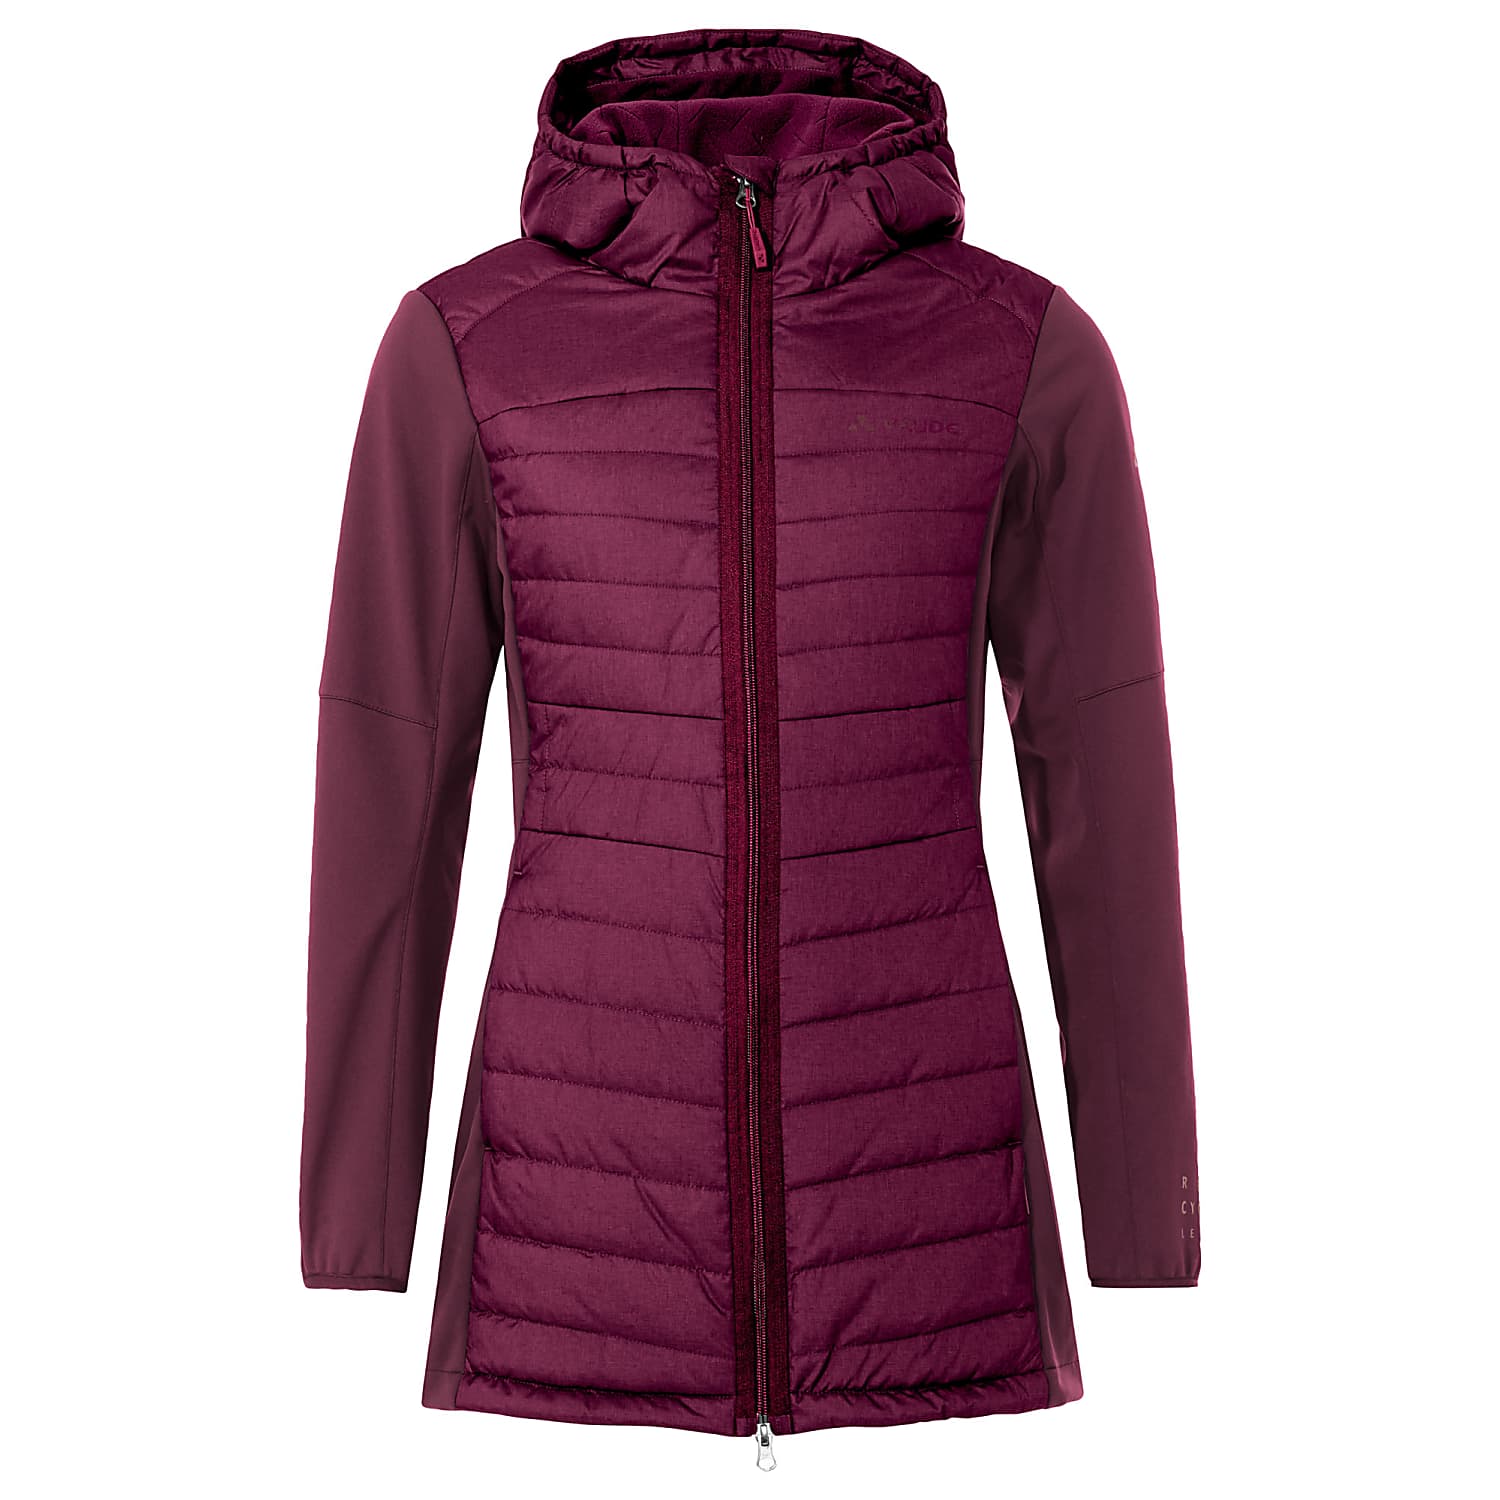 Passion SKOMER cheap and WOMENS Vaude shipping Fast HYBRID - Fruit PARKA,